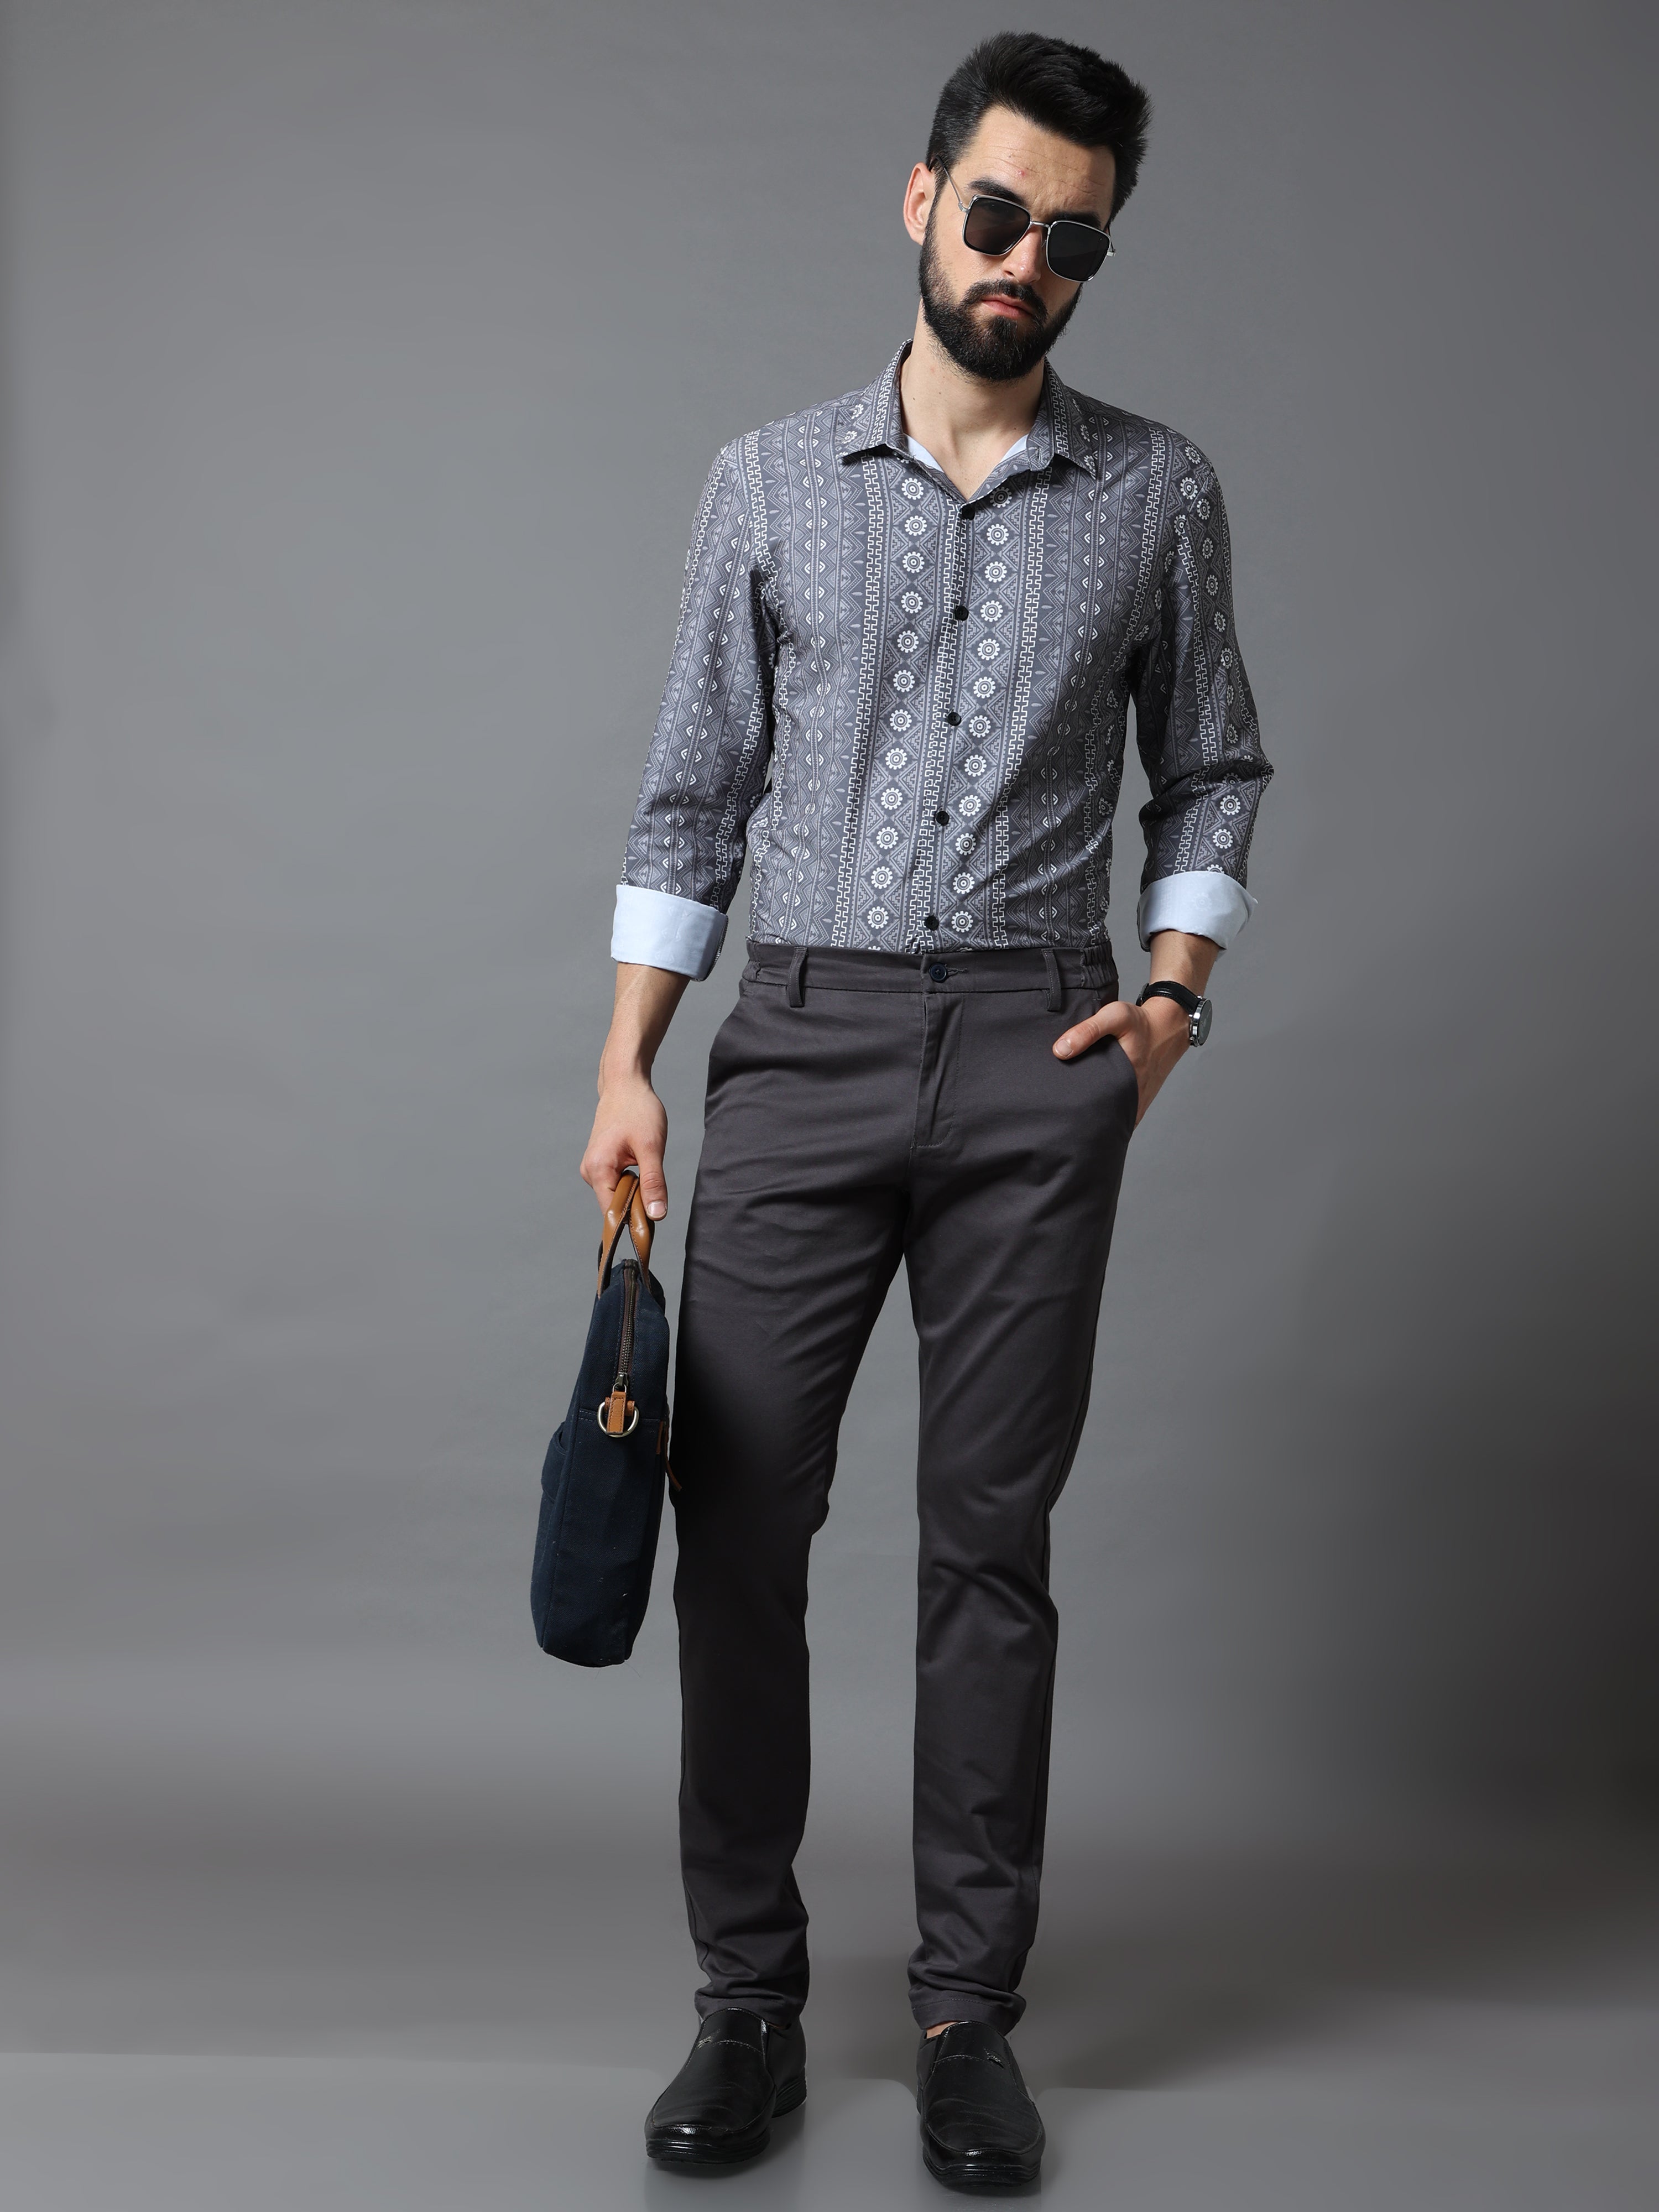 Buy Grey Mid Rise Slim Fit Trousers for Men